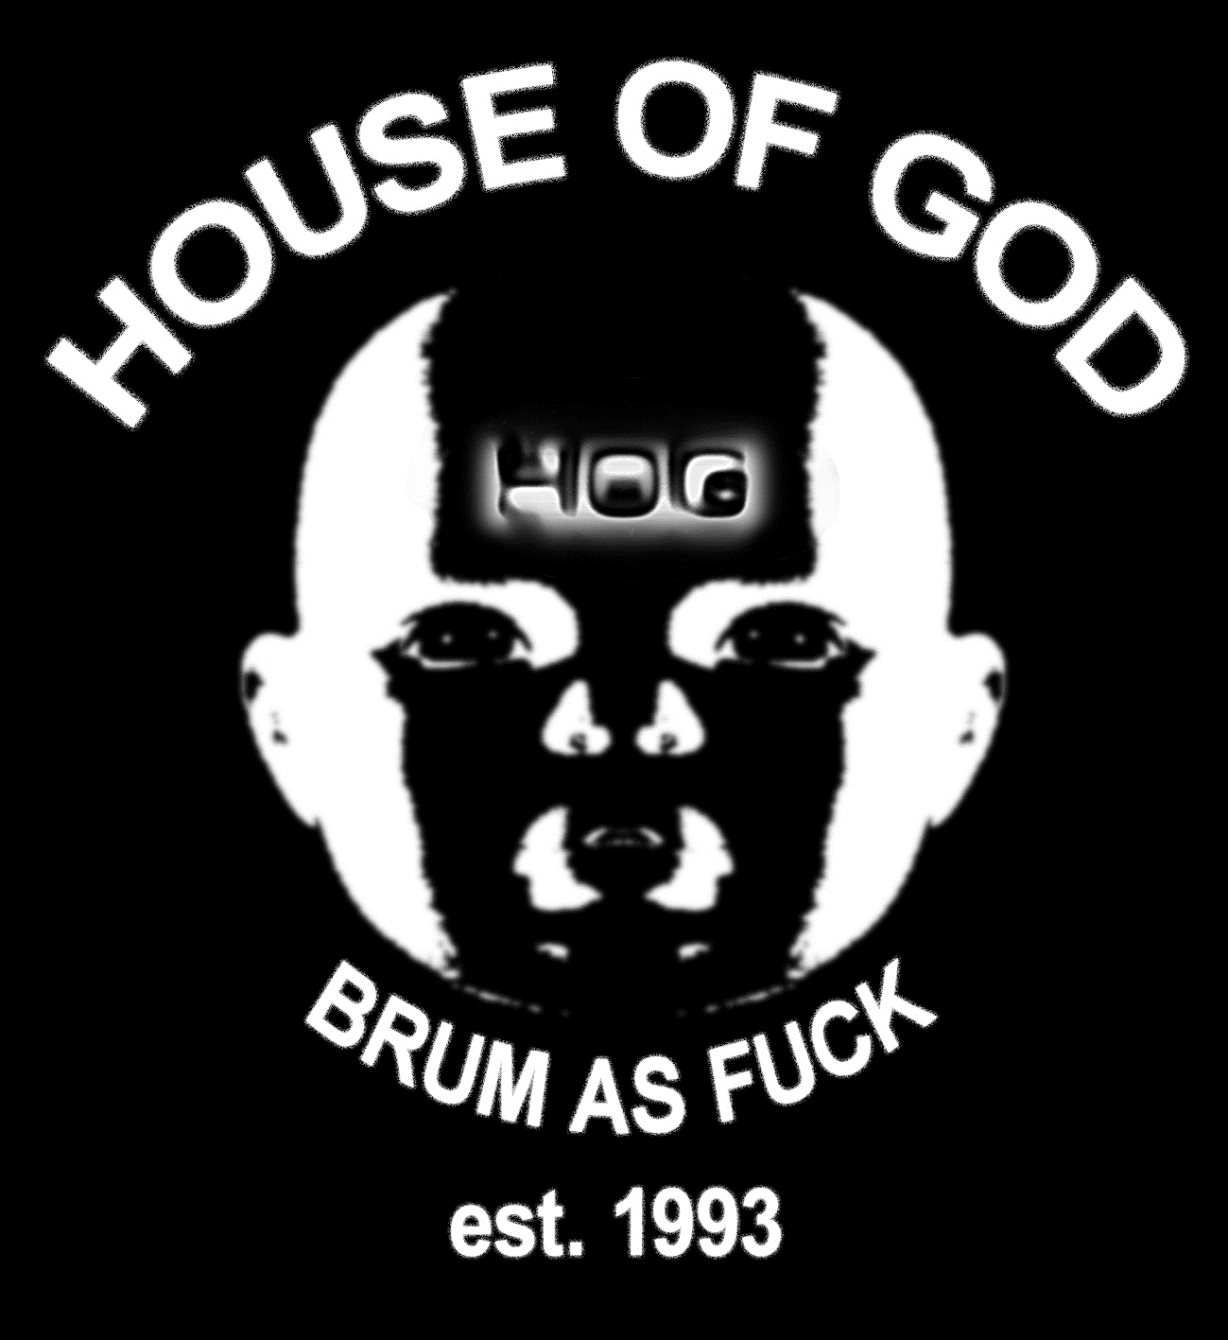 House Of God 24th Birthday - Flyer front